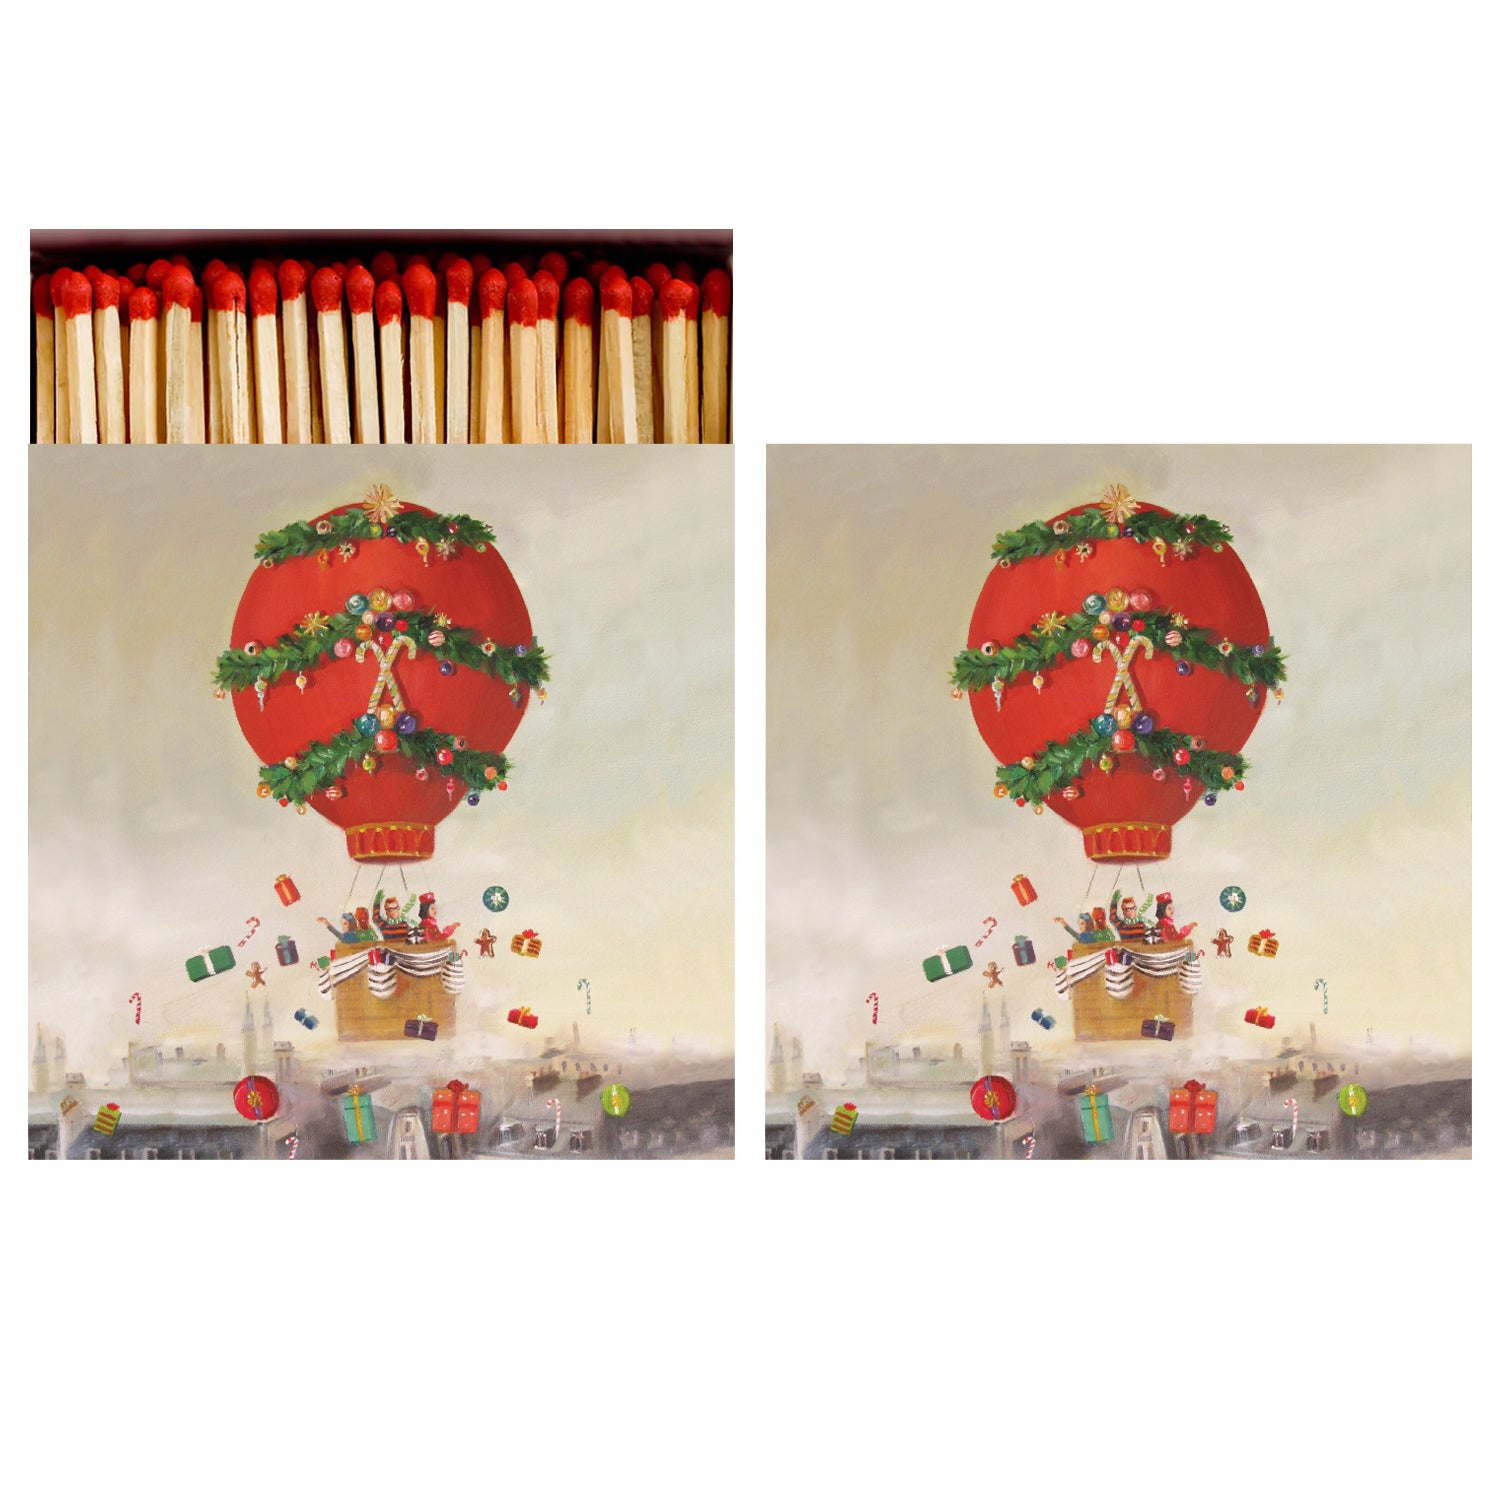 A festive hot air balloon adorned with christmas decorations, perfect for gifting as Balloon Ride Matches from Hester &amp; Cook or a festive hostess gift.